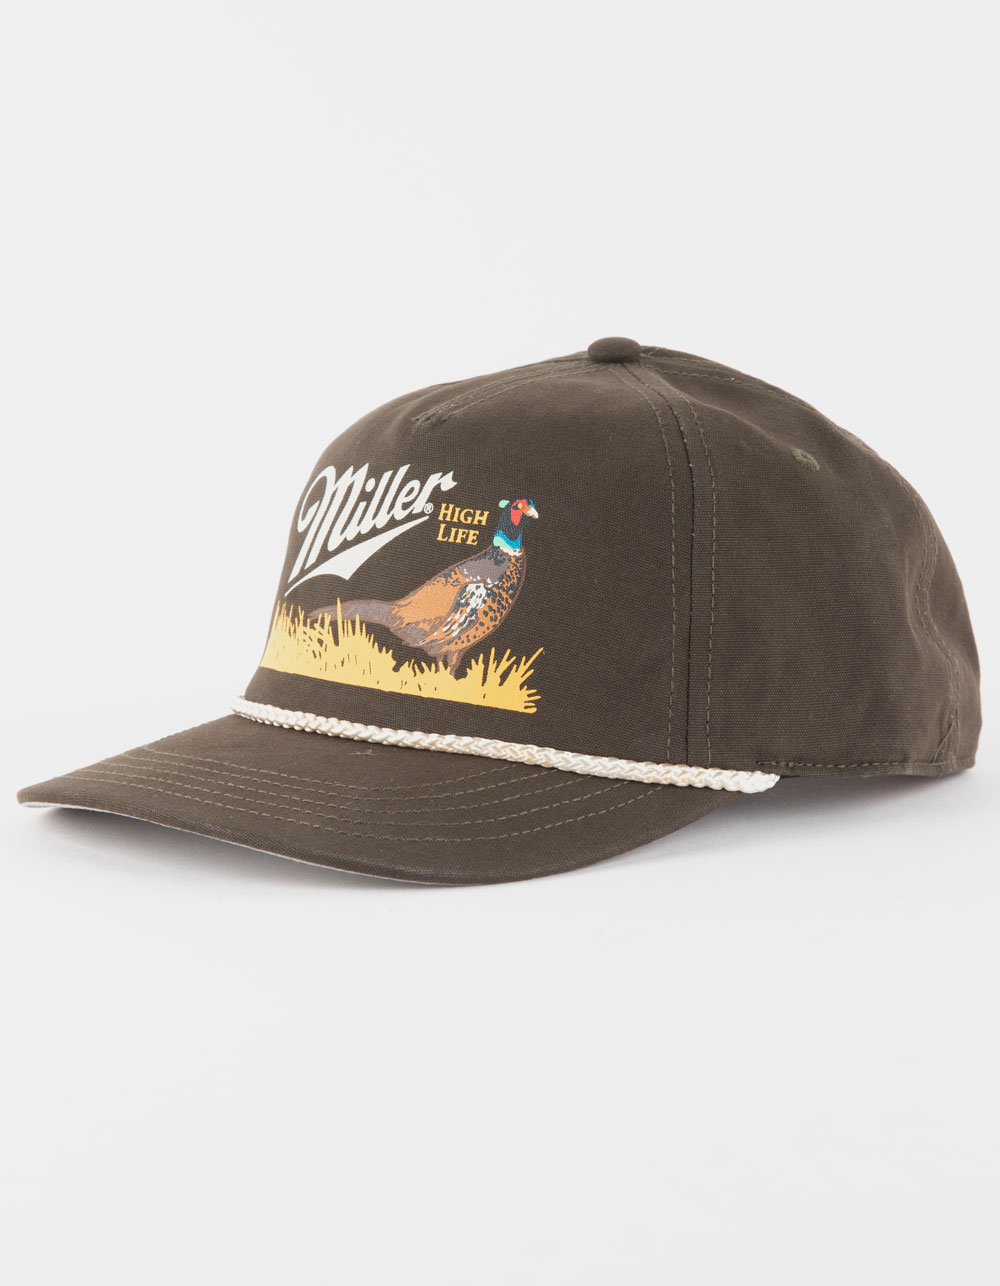 American Needle Miller High Life Canvas Cappy Snapback Hat - Olive - One Size